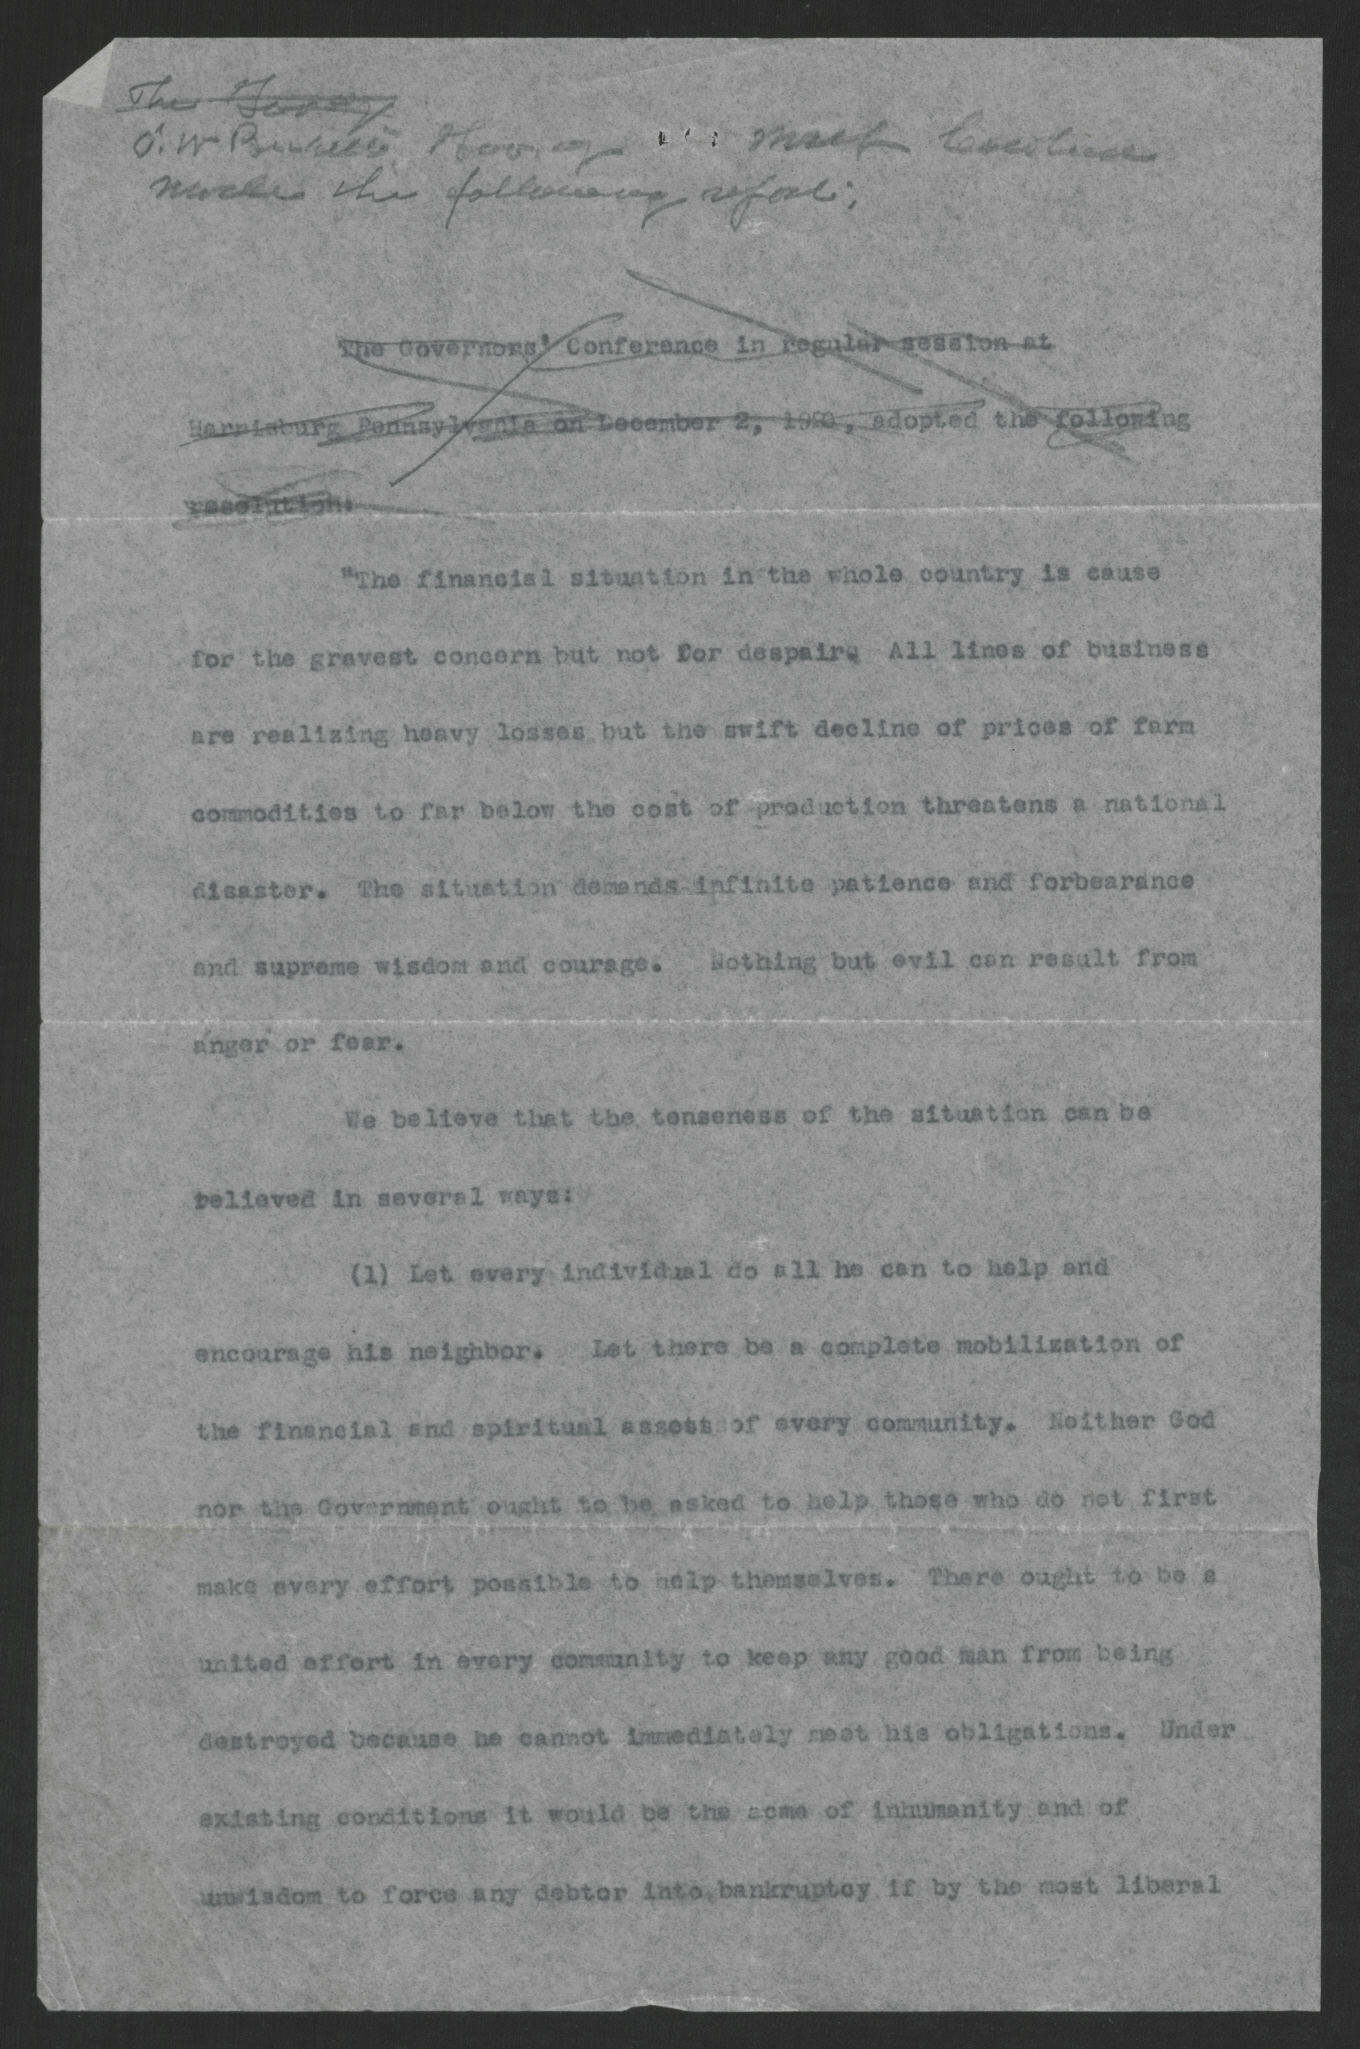 Statement by the Governors' Conference on the Nation's Financial Standing, December 2, 1920, page 1